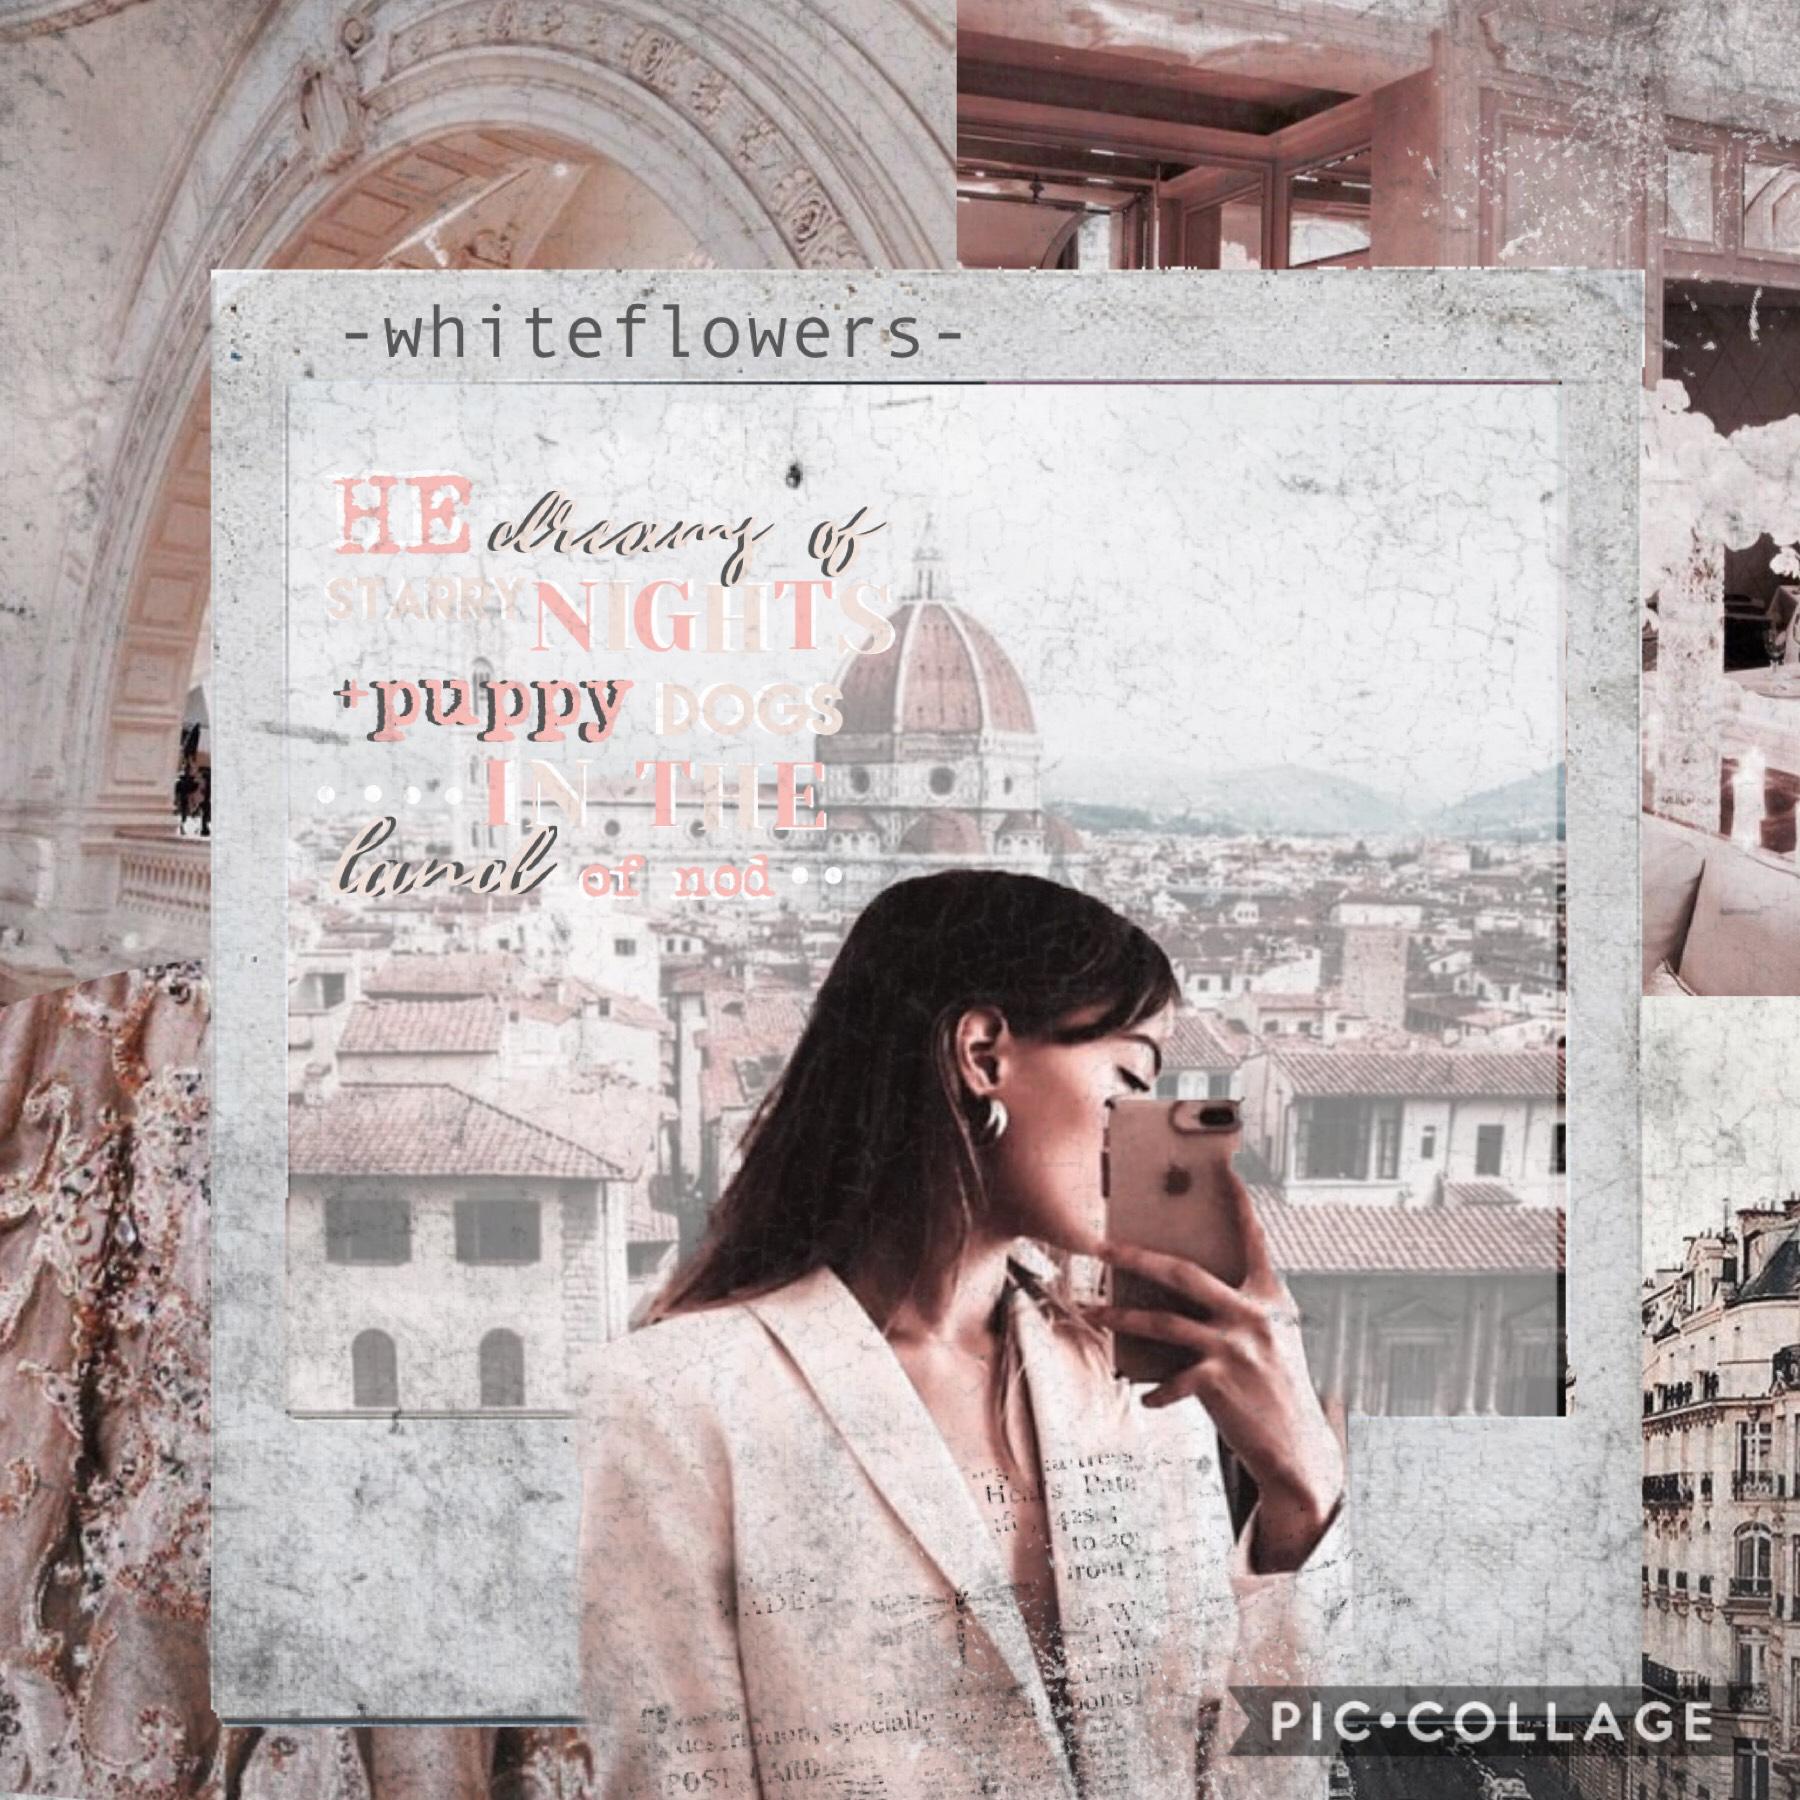 ONLY 1 DAY LEFT TO ENTER MY CONTEST TAP 💓 
MAKE SURE TO HEAD OVER TO -WHITEFLOWERS-EXTRA TO ENTER BEFORE DEADLINE CLOSES TOMORROW!!
Hope you like this collage! I’ve got school tomorrow ugh! So I might not be as active! Xx